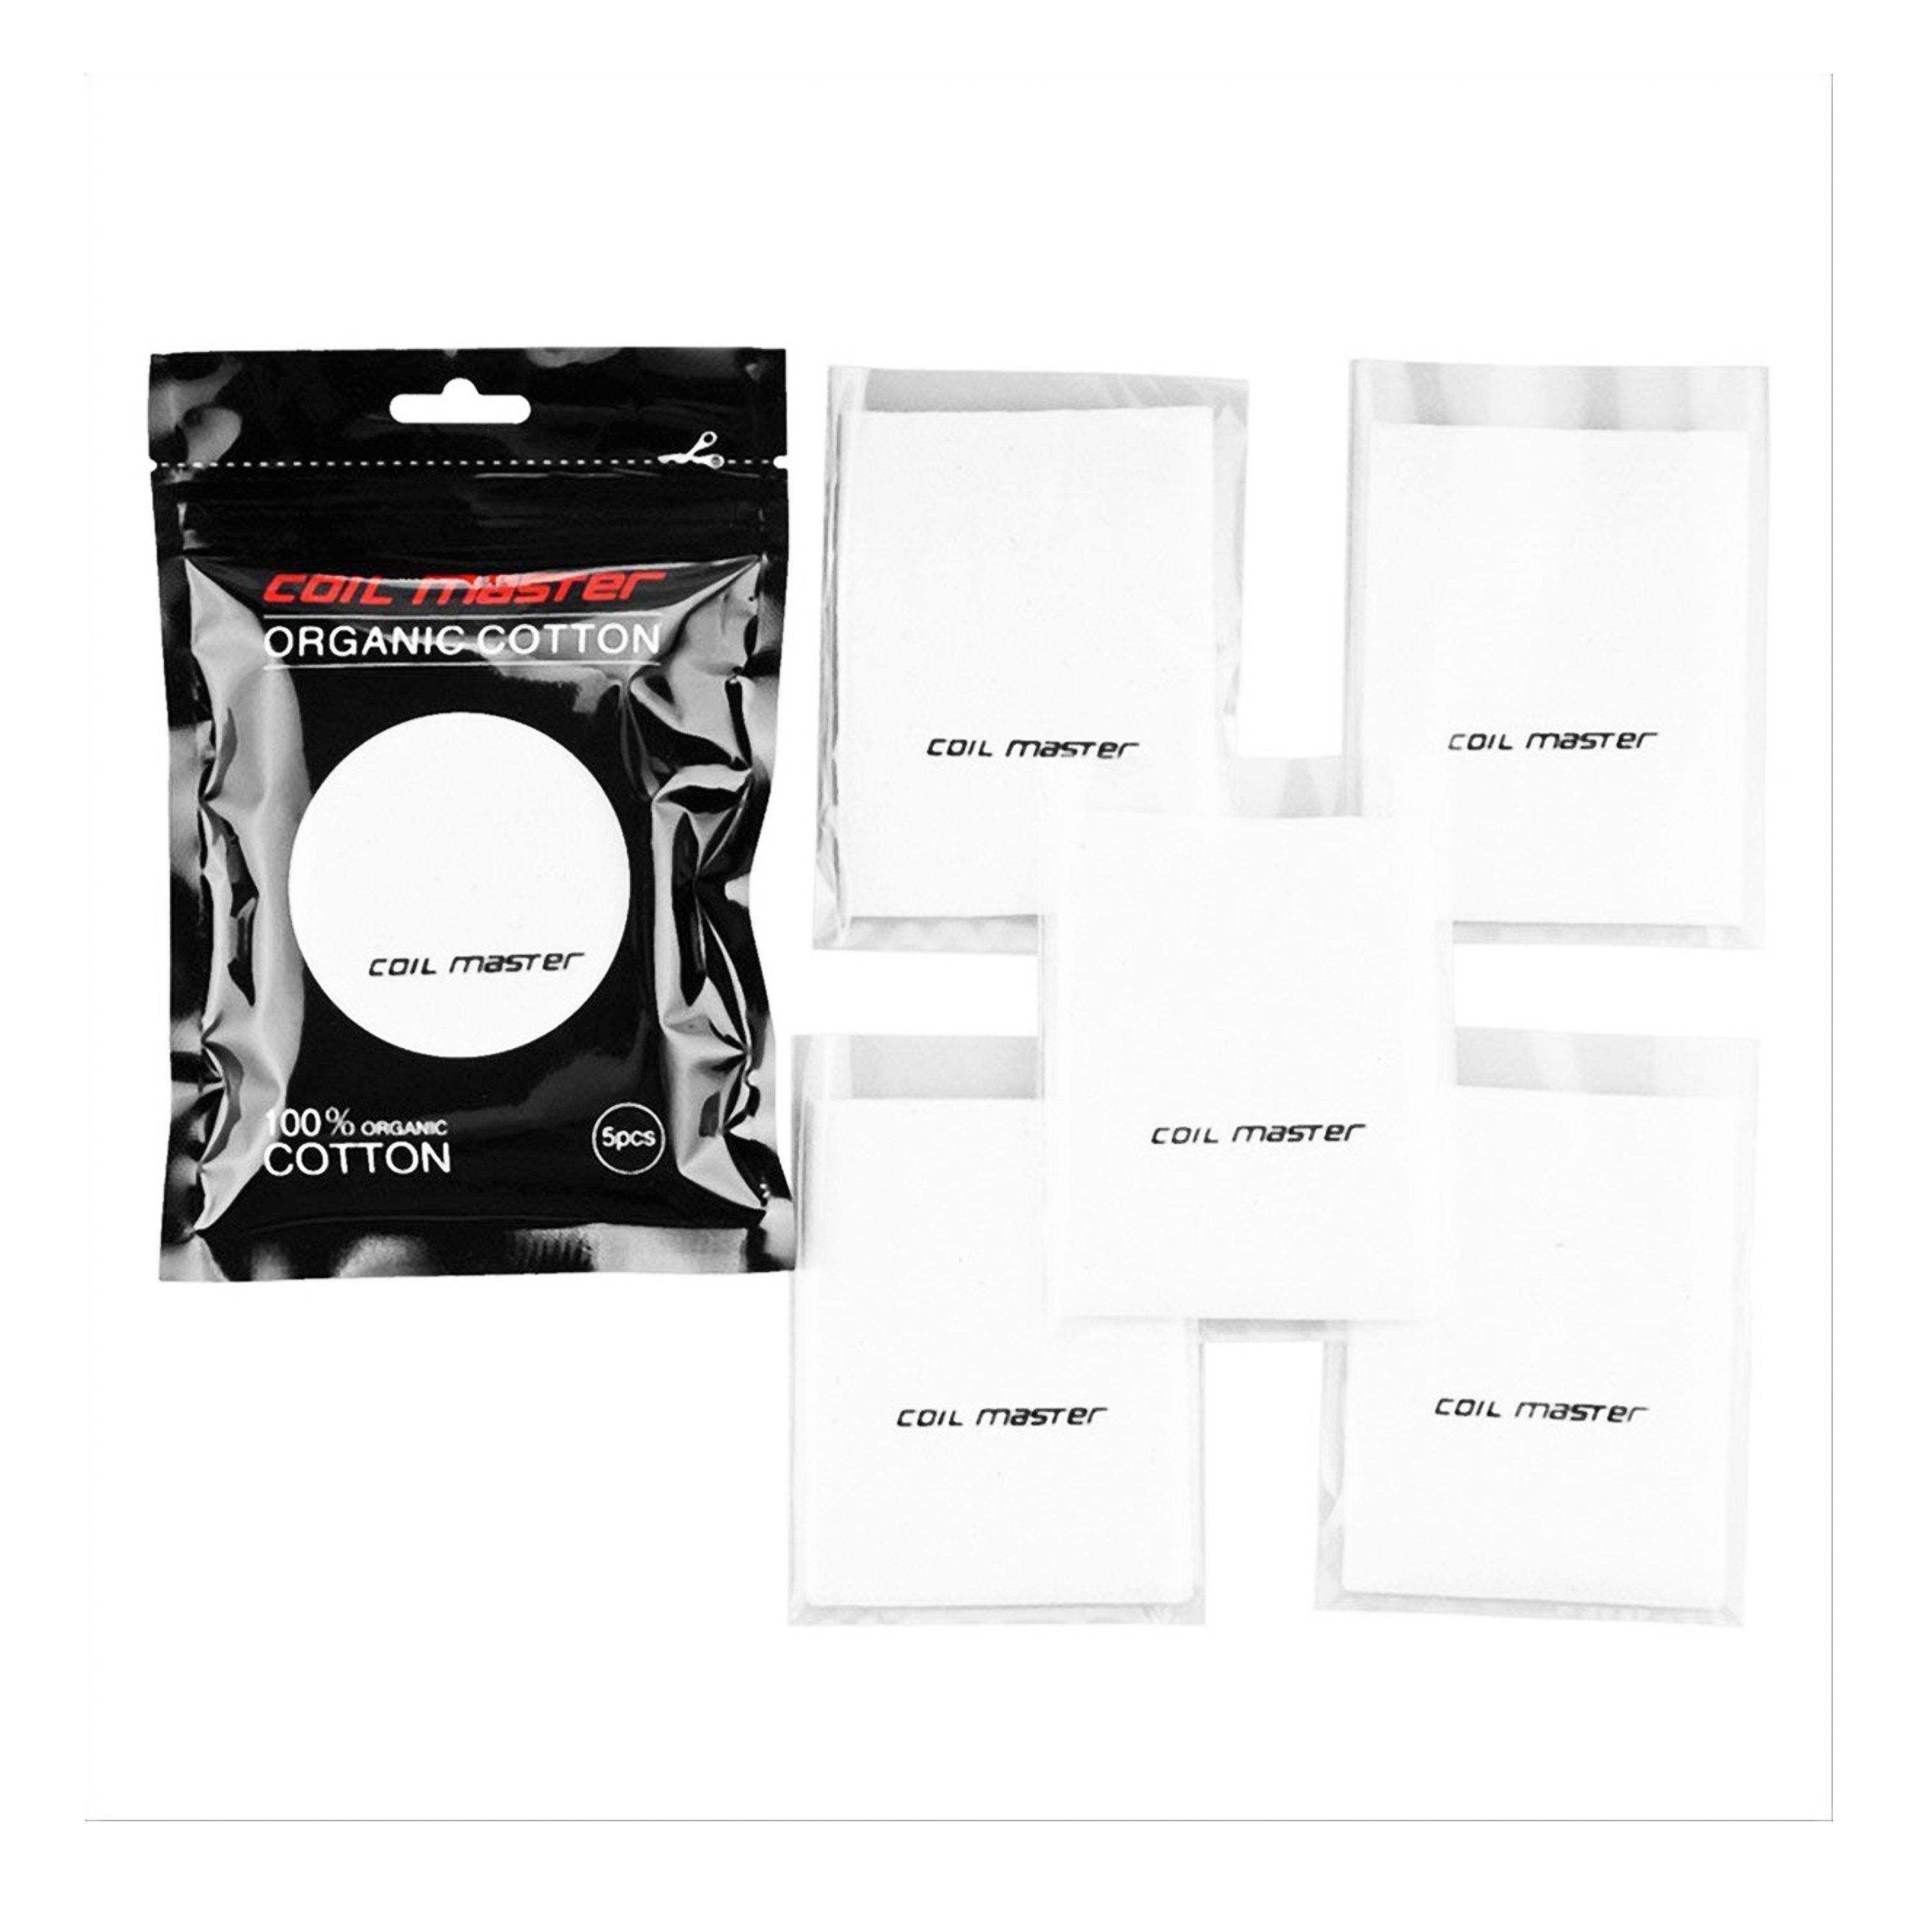 Coil Master Organic Cotton (5 Pads)